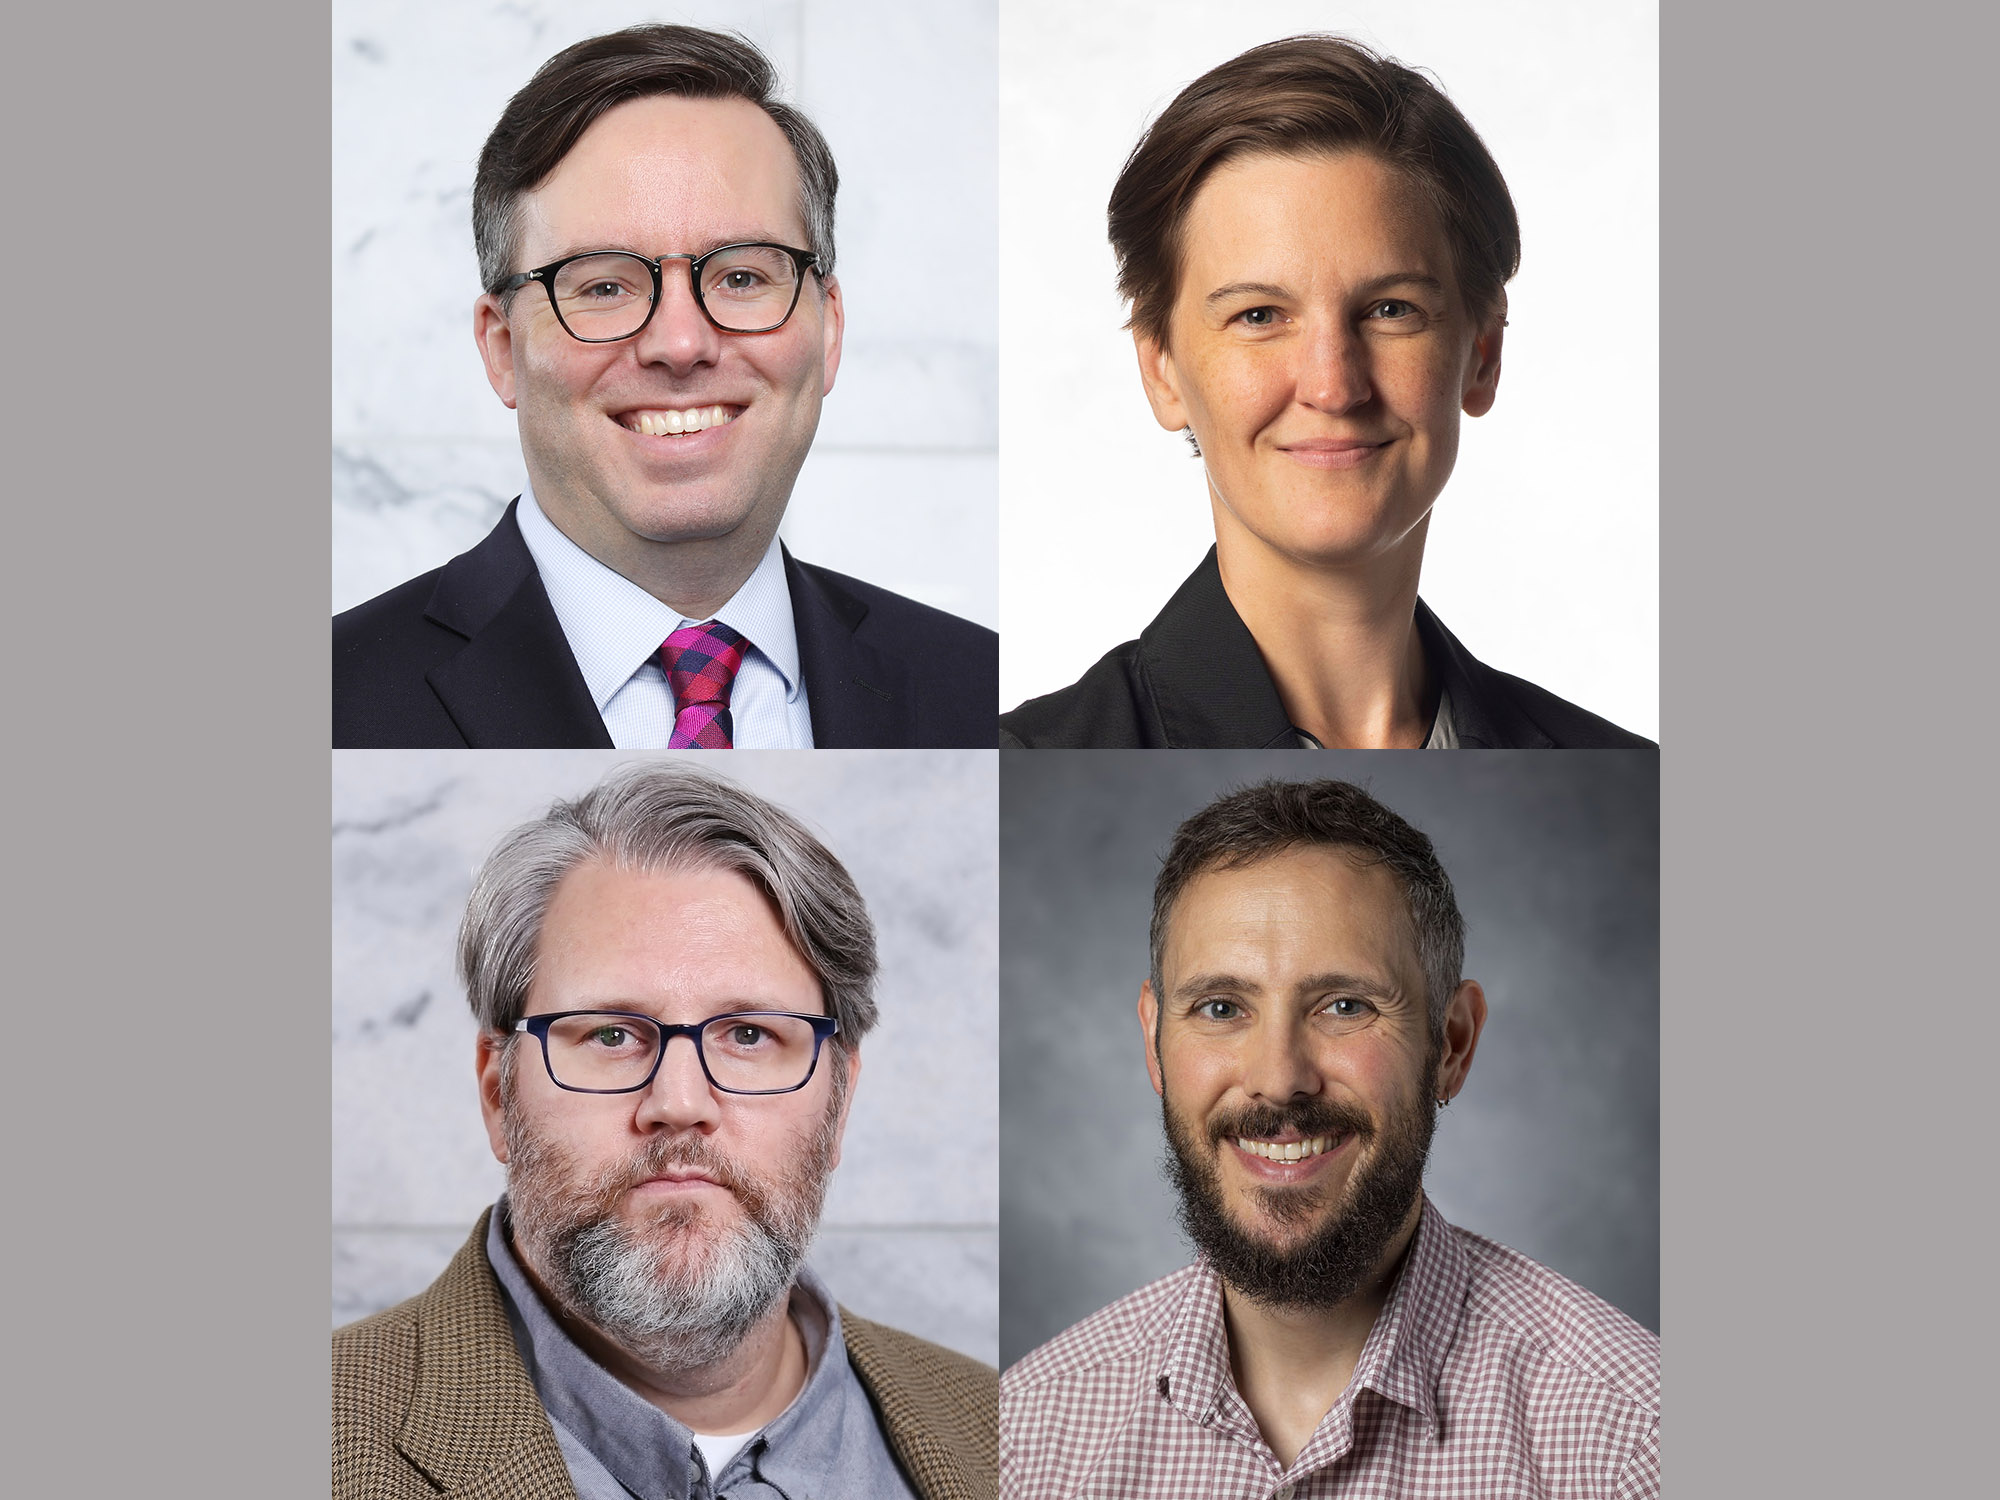 Four earn promotions, including named professorships